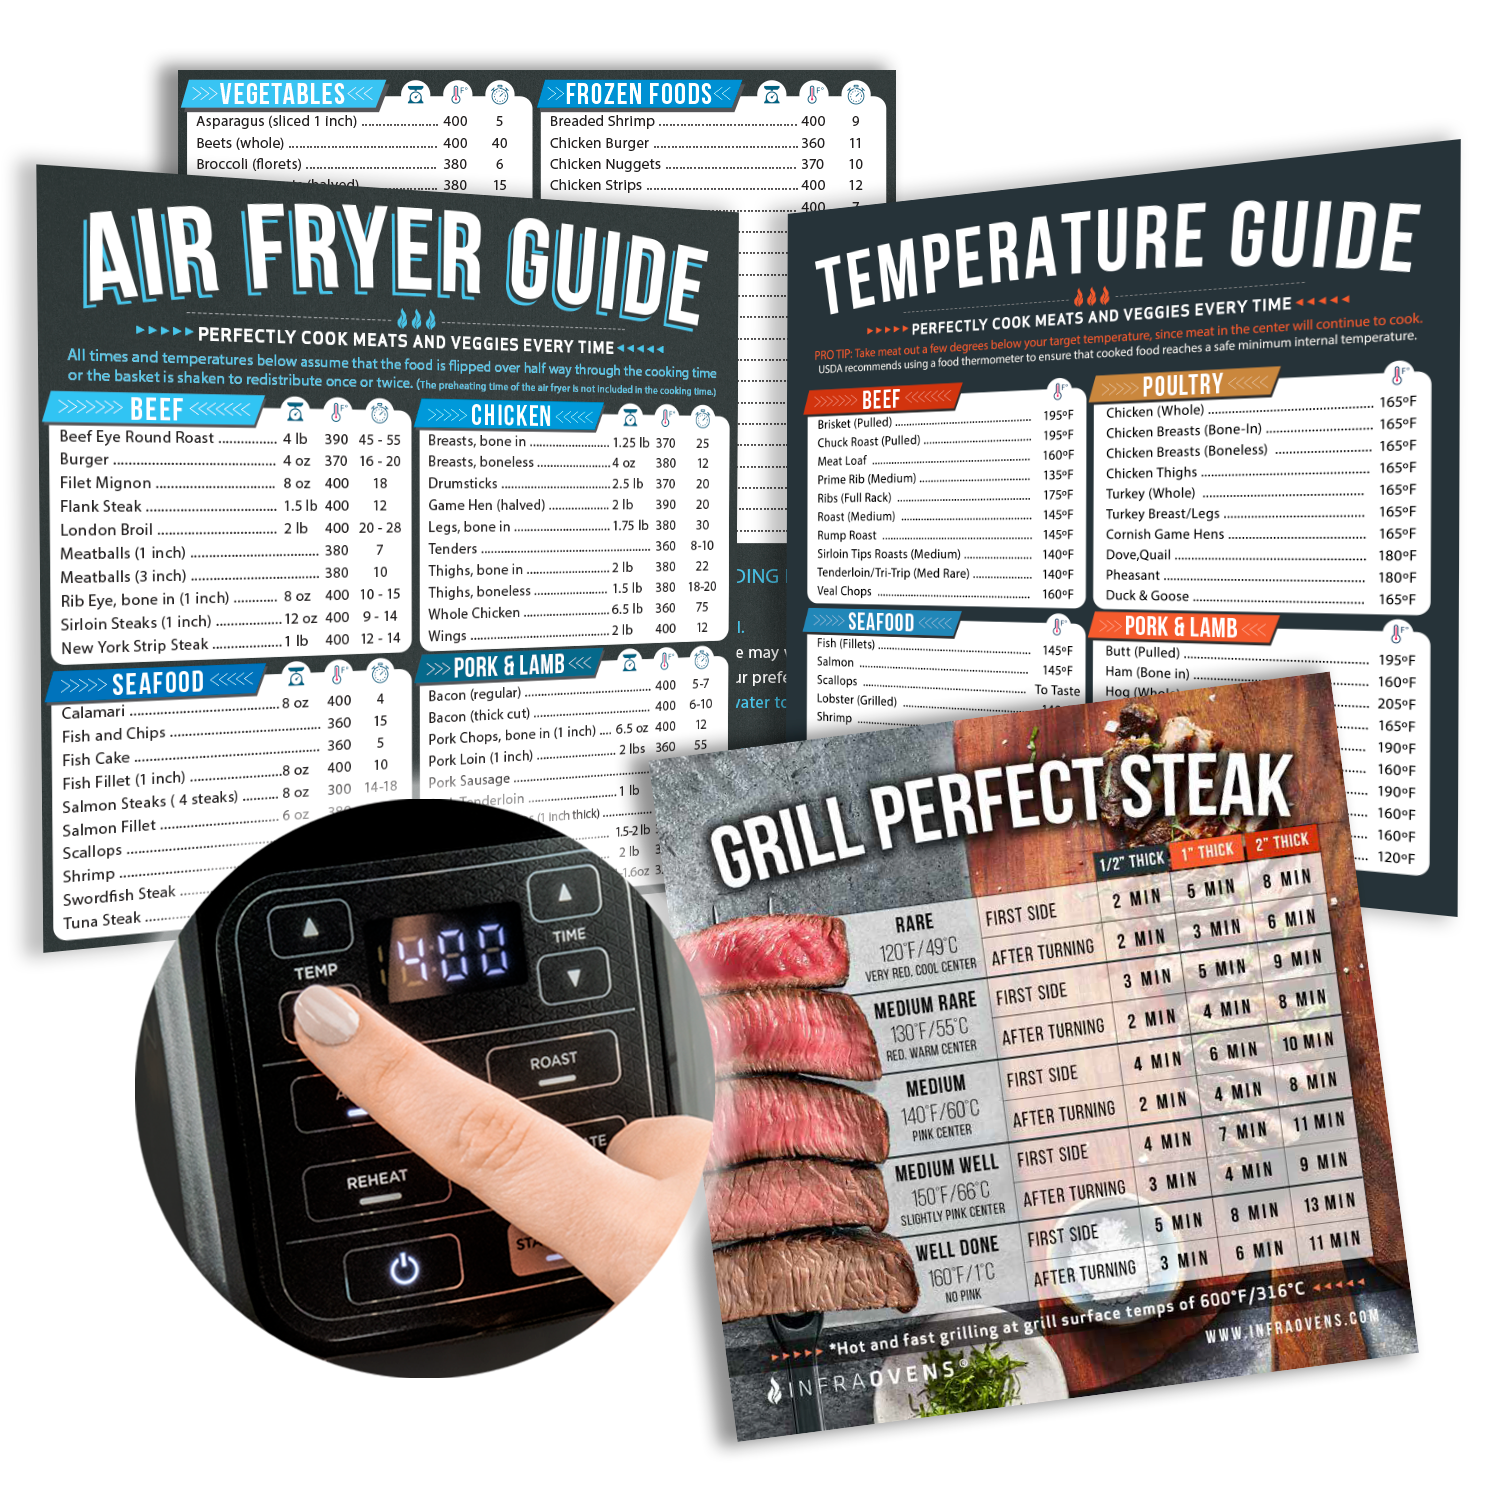 Air Fryer Cooking Times Chart, Air Fryer Magnetic Cheat Sheet Kitchen Fryer  Magnet Sheet Cooking Frying Time Reference Guide Cookware Accessories 